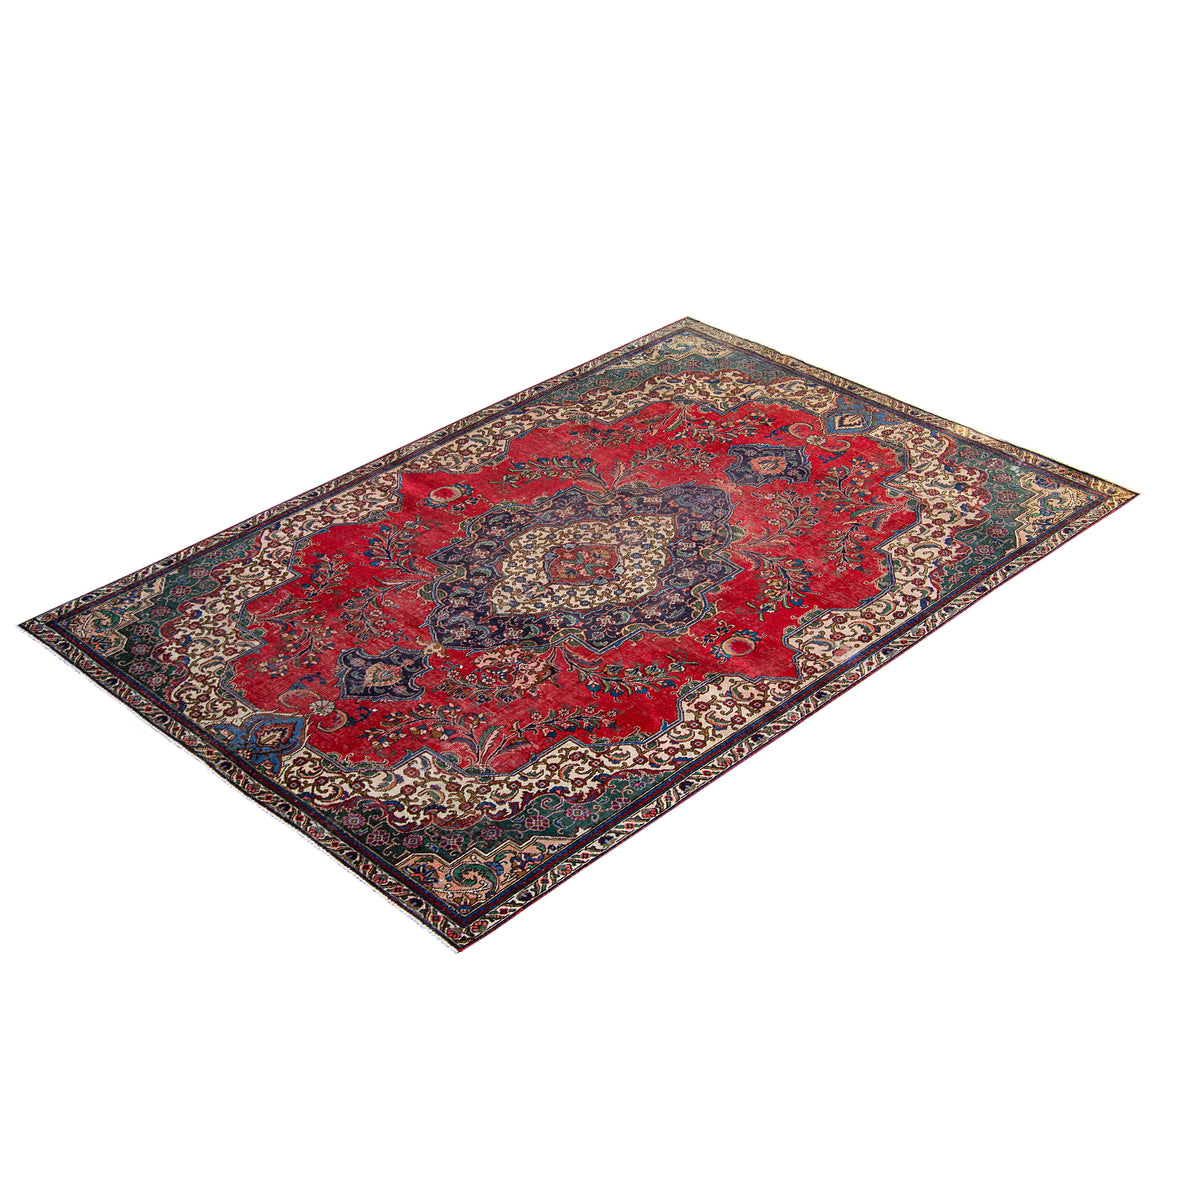 Hand-knotted Vintage Persian Rug  216cm x 315cm